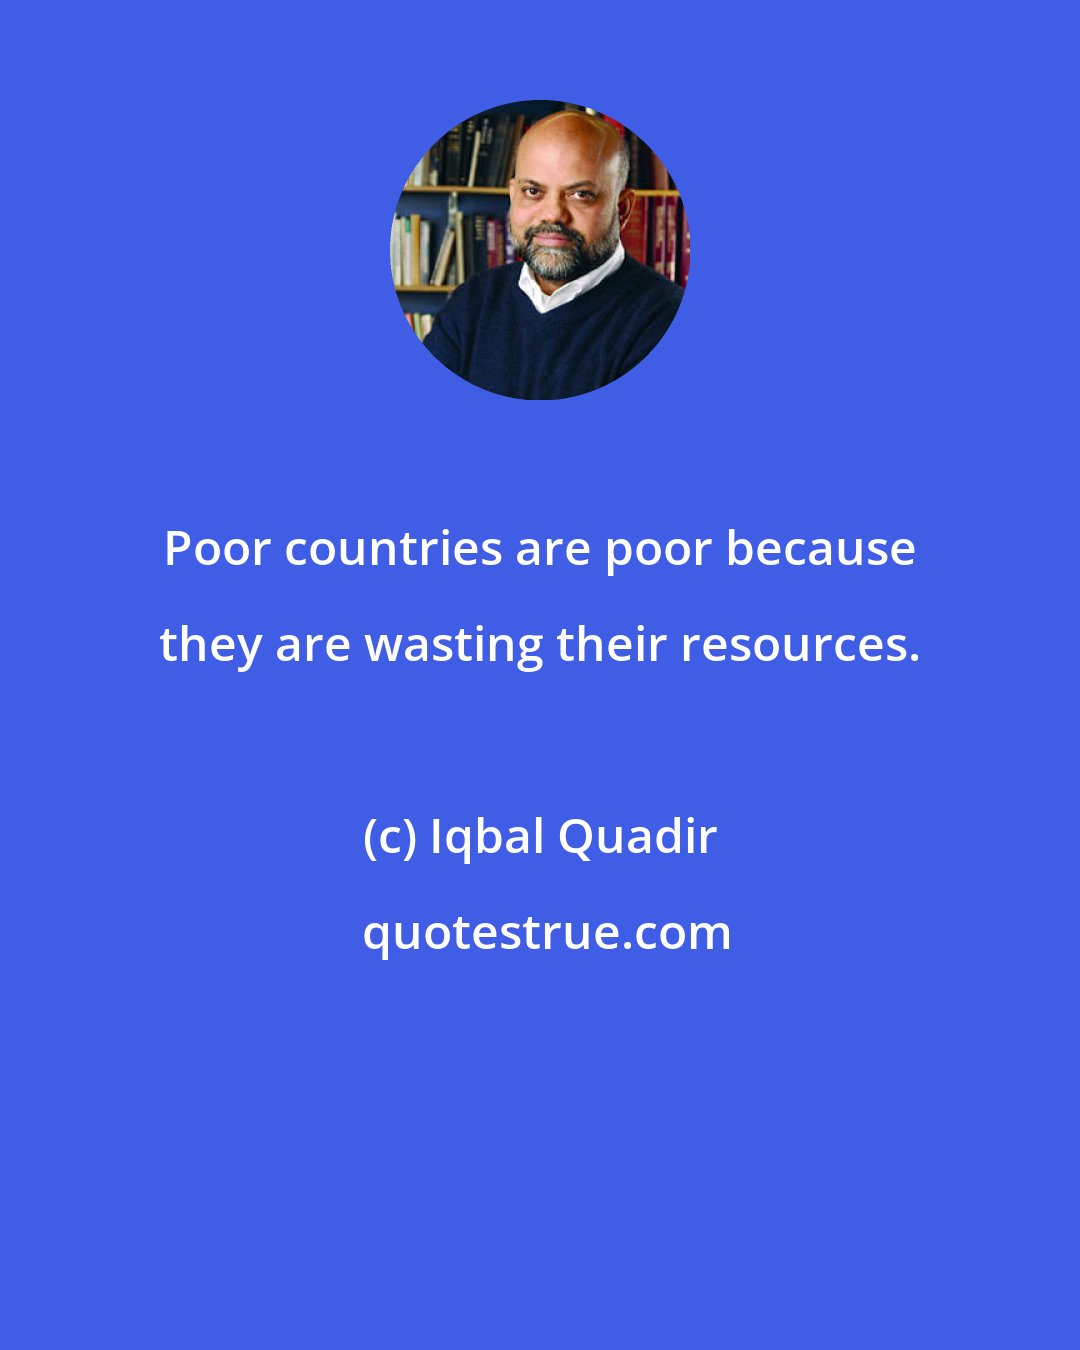 Iqbal Quadir: Poor countries are poor because they are wasting their resources.